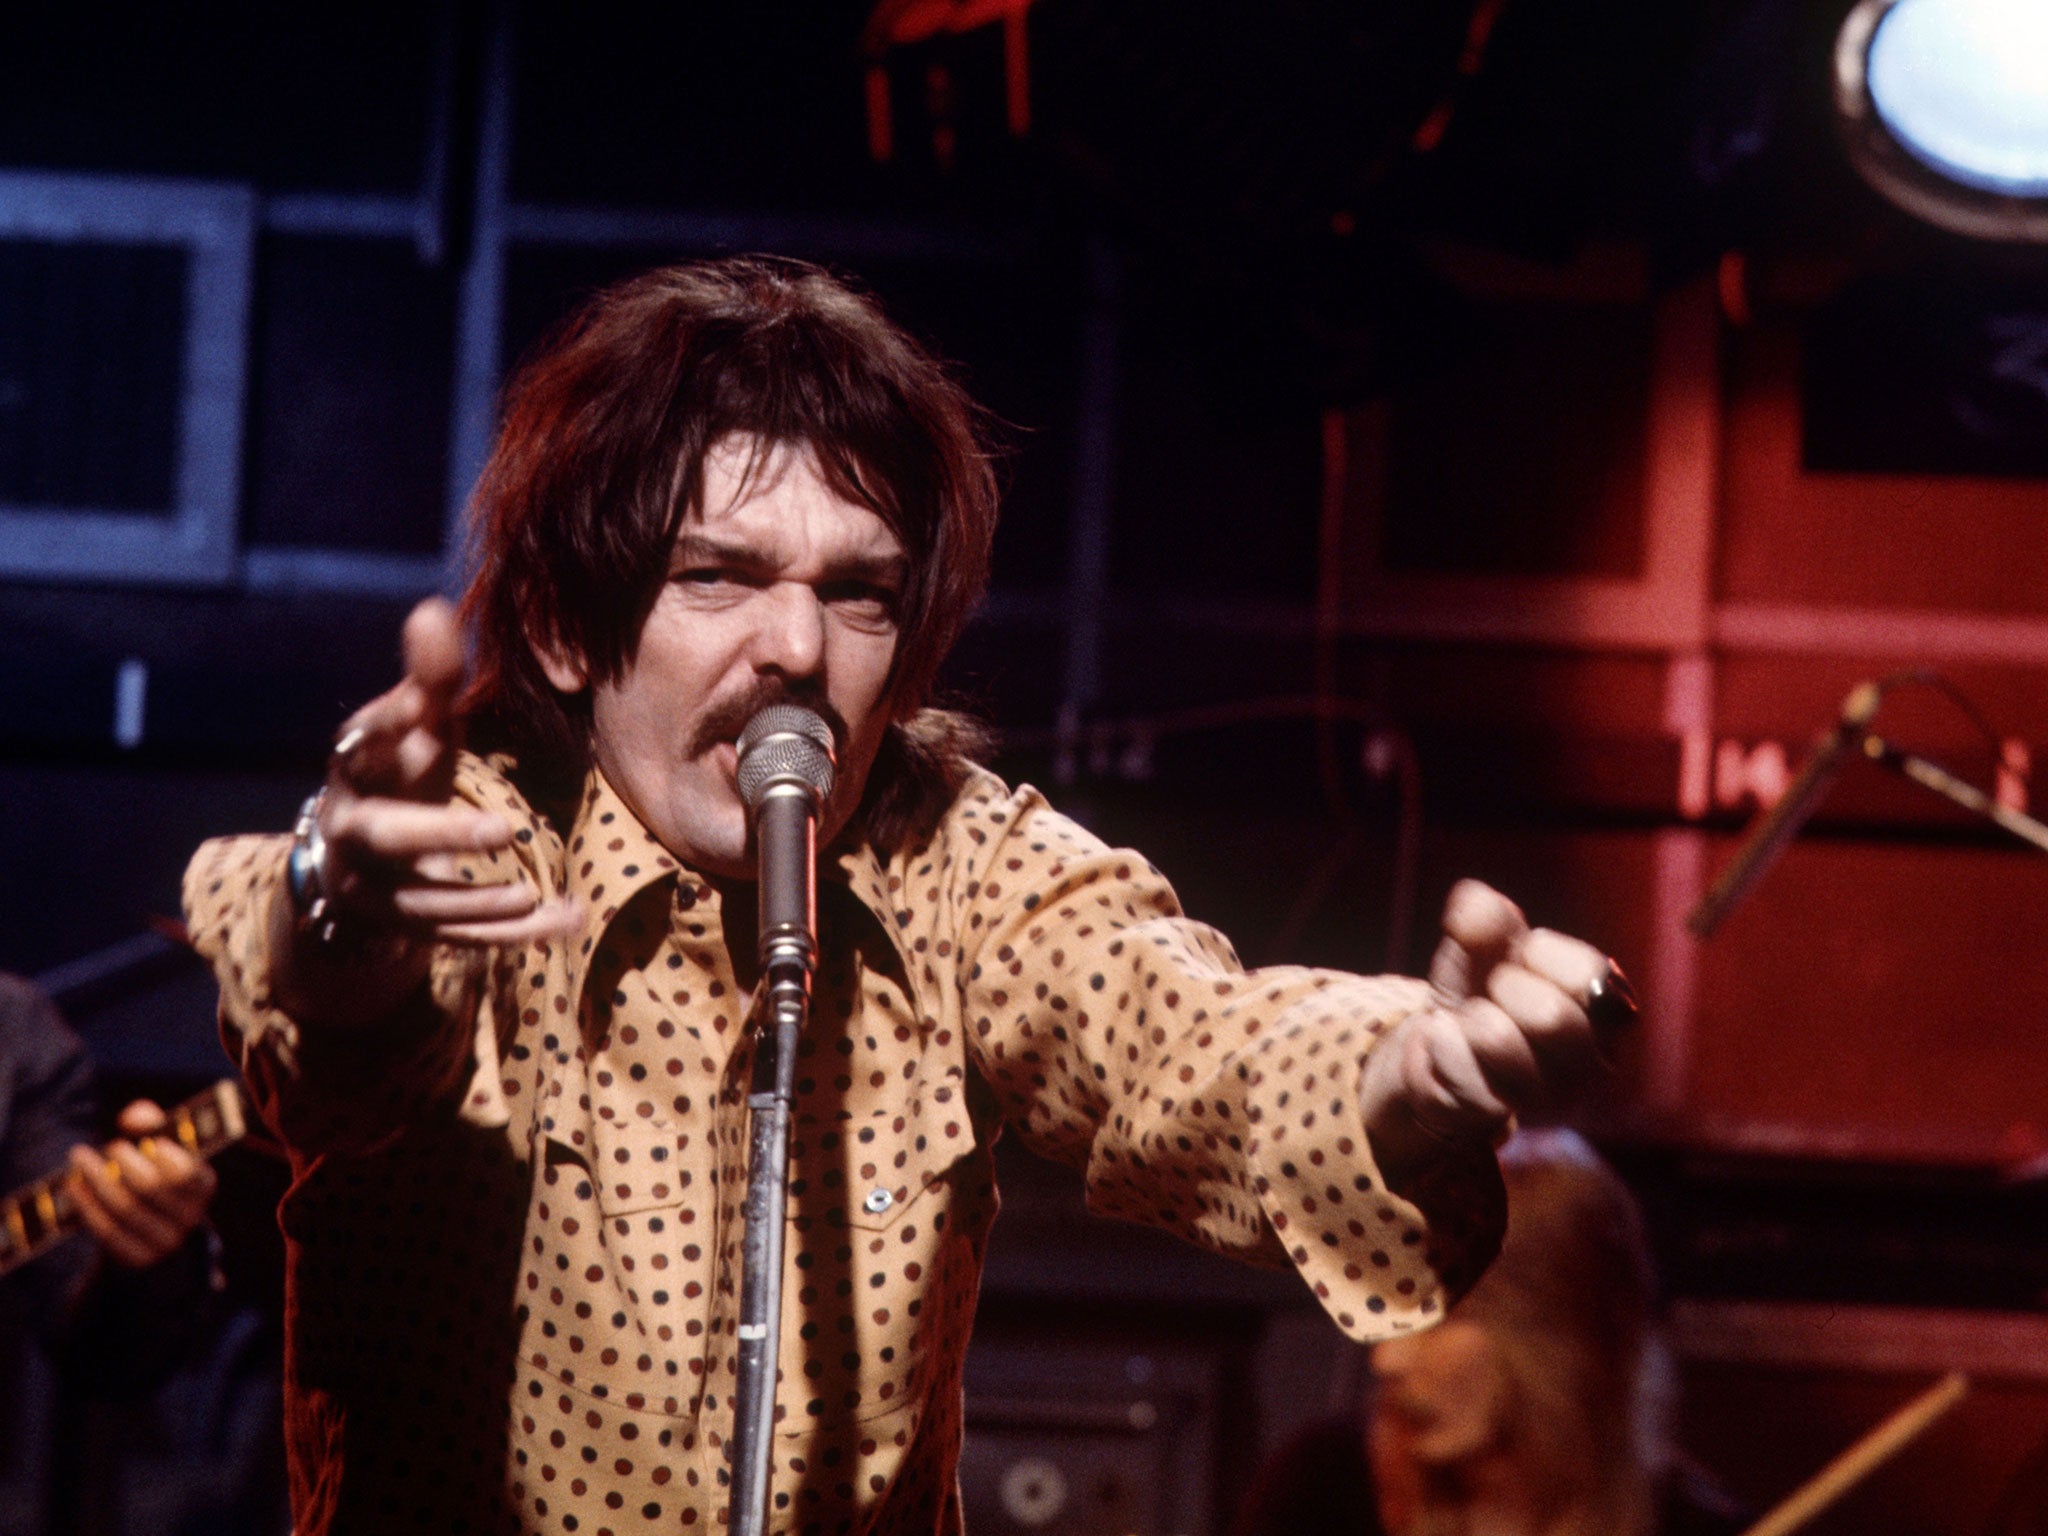 Captain Beefheart performs on stage in 1975